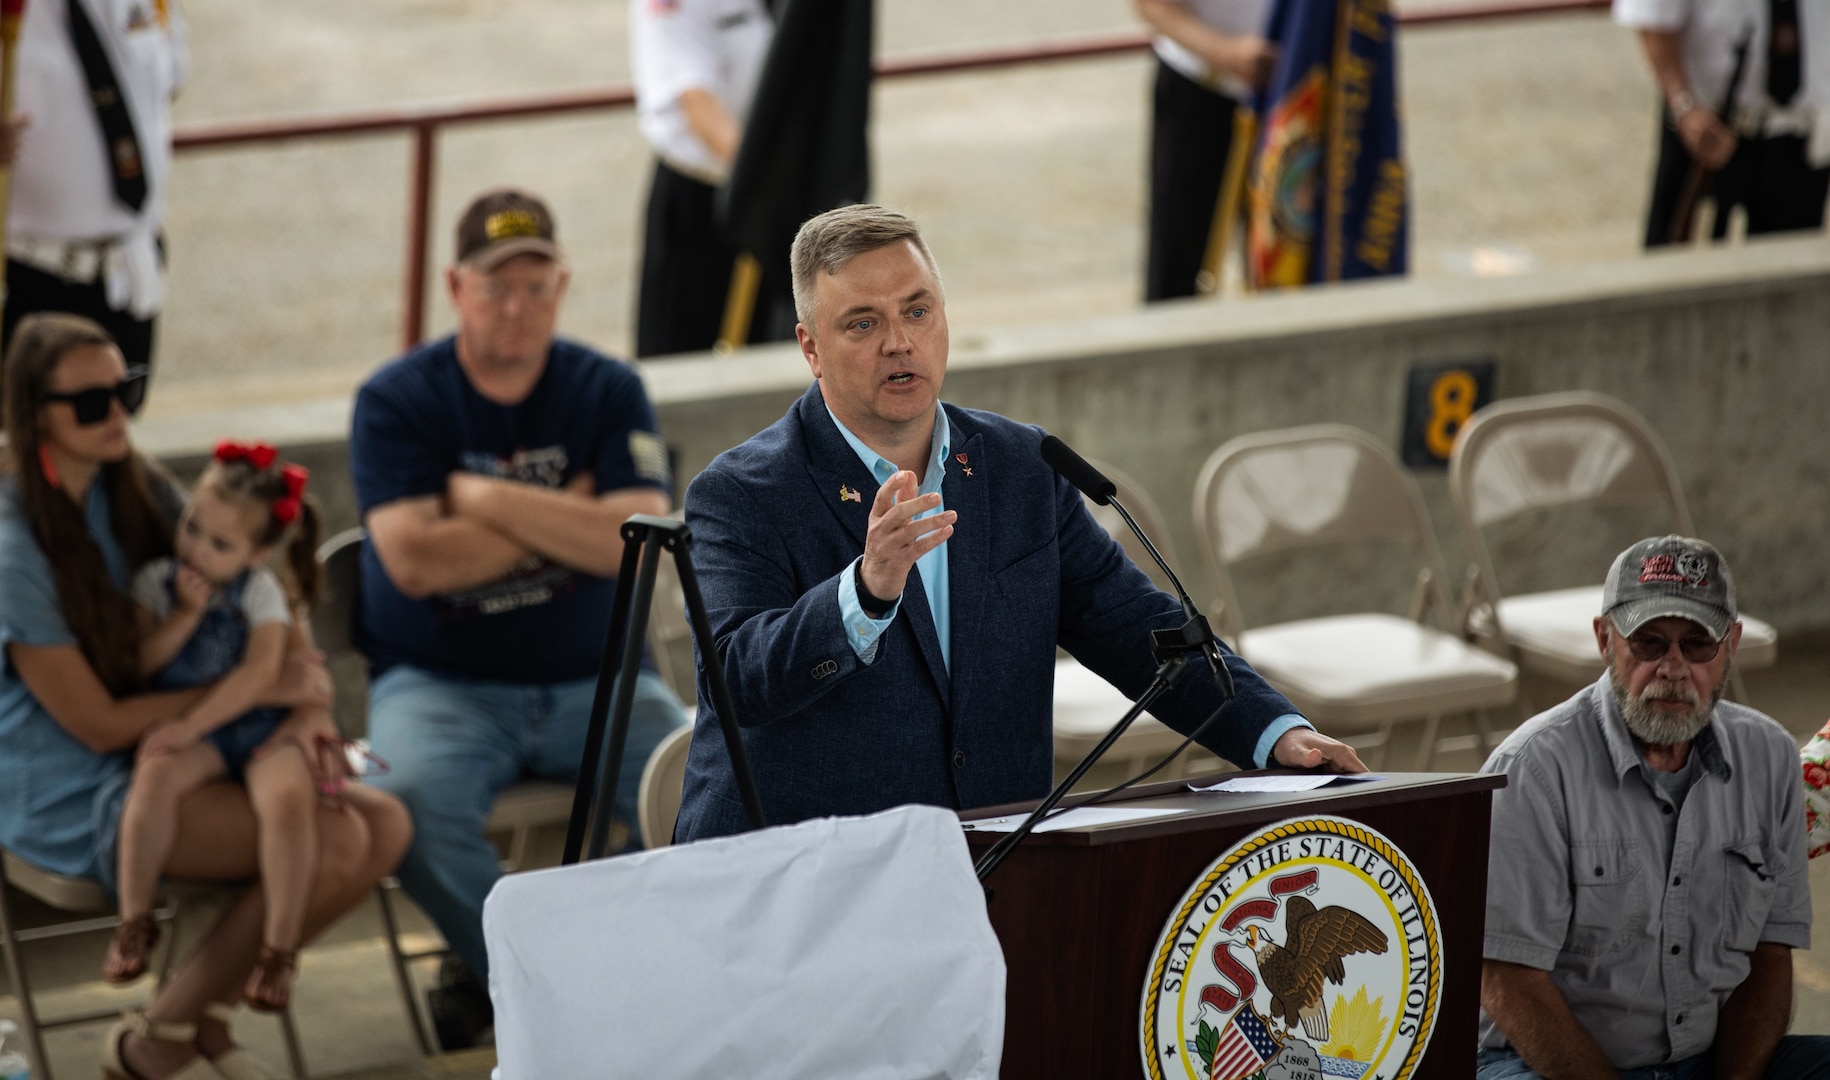 Retired Maj. Gen. Johnny Miller, from Tamms, Illinois, who served as Romines’ battalion commander on June 6, 2005, talks about how June 6, 2005 was one of the hardest days in his 32-year military career, during the Sgt. Brian Romines Memorial Highway dedication ceremony June 6 in Anna, Illinois.